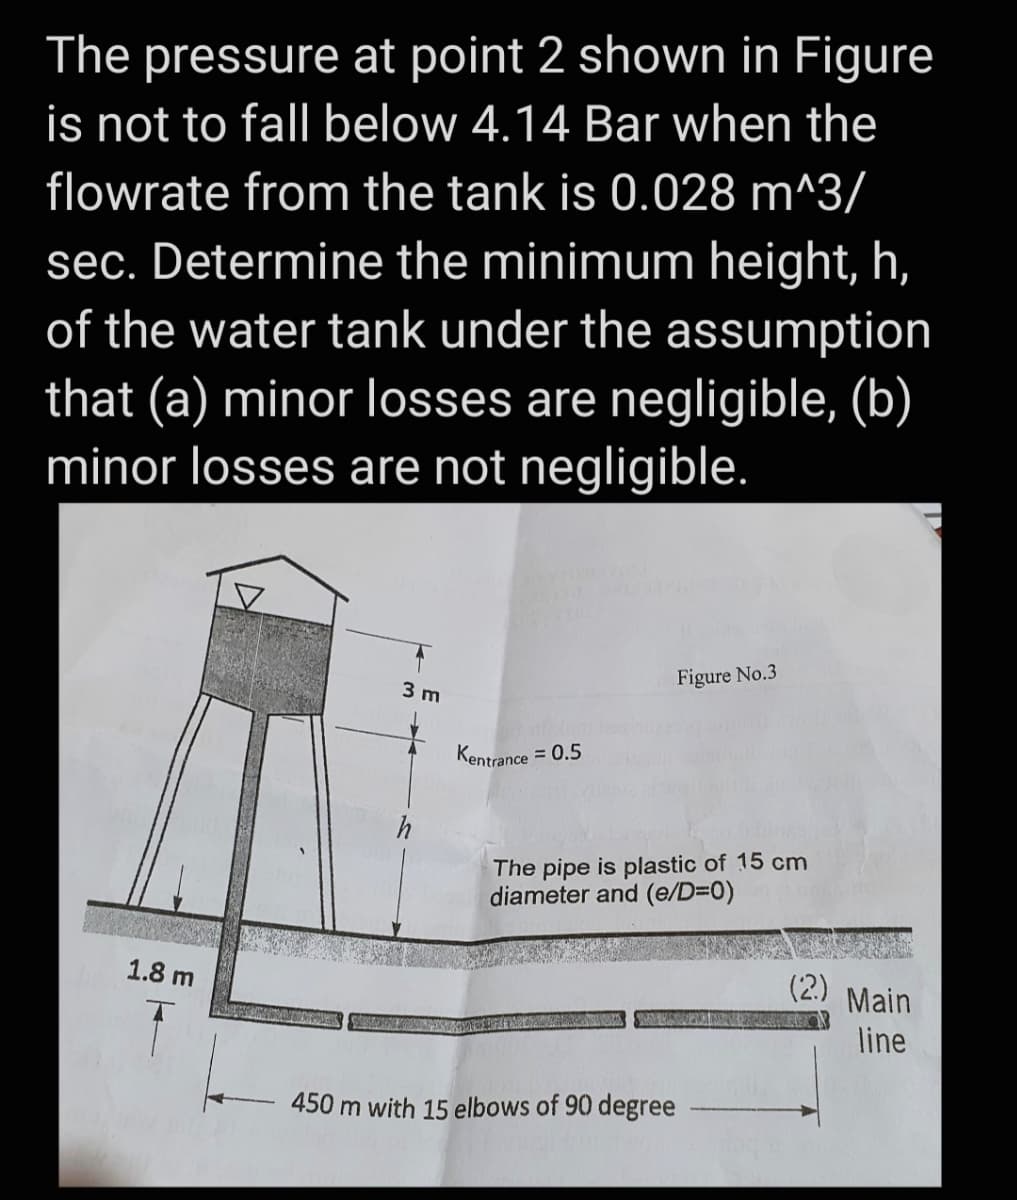 The pressure at point 2 shown in Figure
is not to fall below 4.14 Bar when the
flowrate from the tank is 0.028 m^3/
sec. Determine the minimum height, h,
of the water tank under the assumption
that (a) minor losses are negligible, (b)
minor losses are not negligible.
3 m
Figure No.3
Kentrance = 0.5
h
The pipe is plastic of 15 cm
diameter and (e/D=D0)
1.8 m
(2)
Main
line
450 m with 15 elbows of 90 degree
